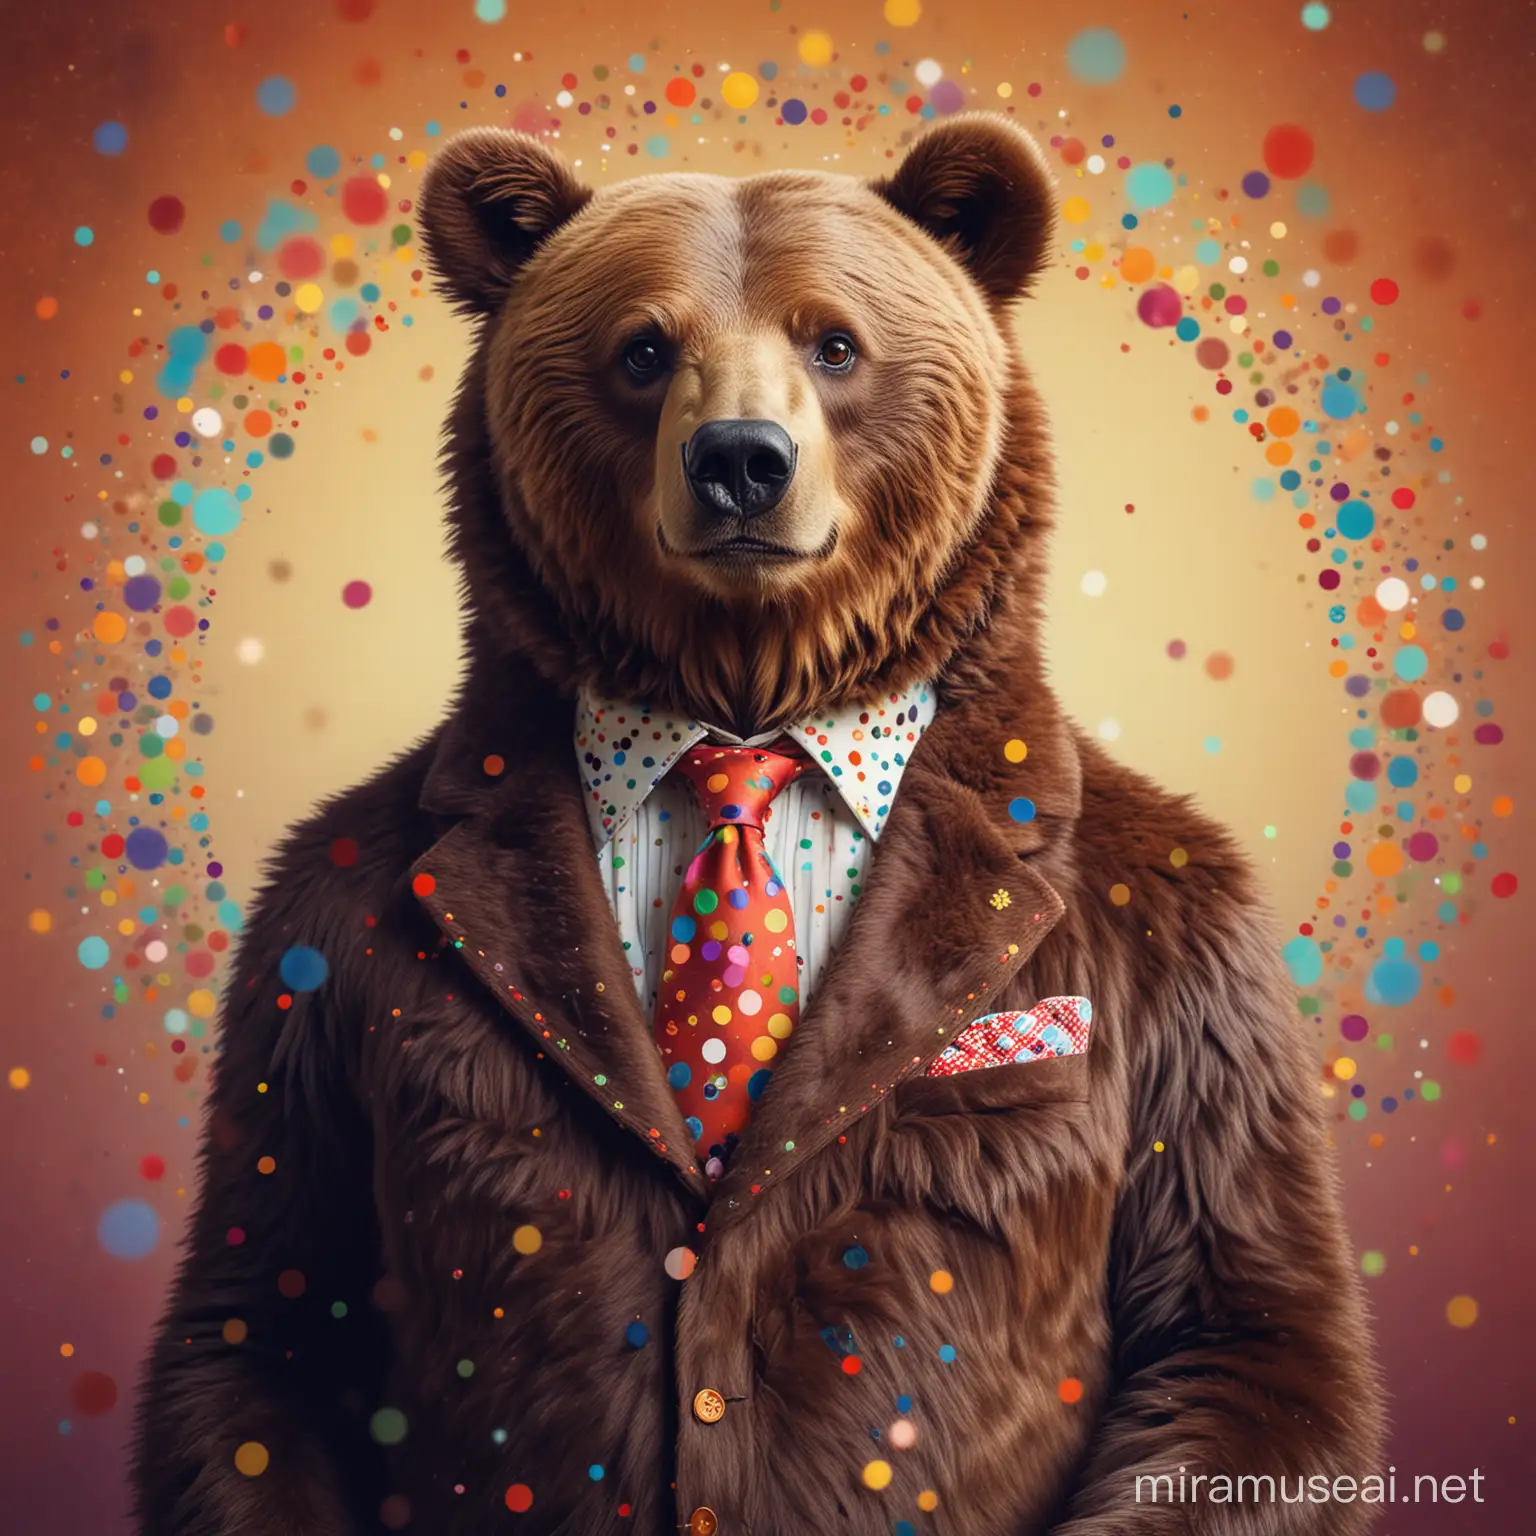 Formally Dressed Bear in Quirky Wes Anderson Style with Colorful Dots on Ornate Background